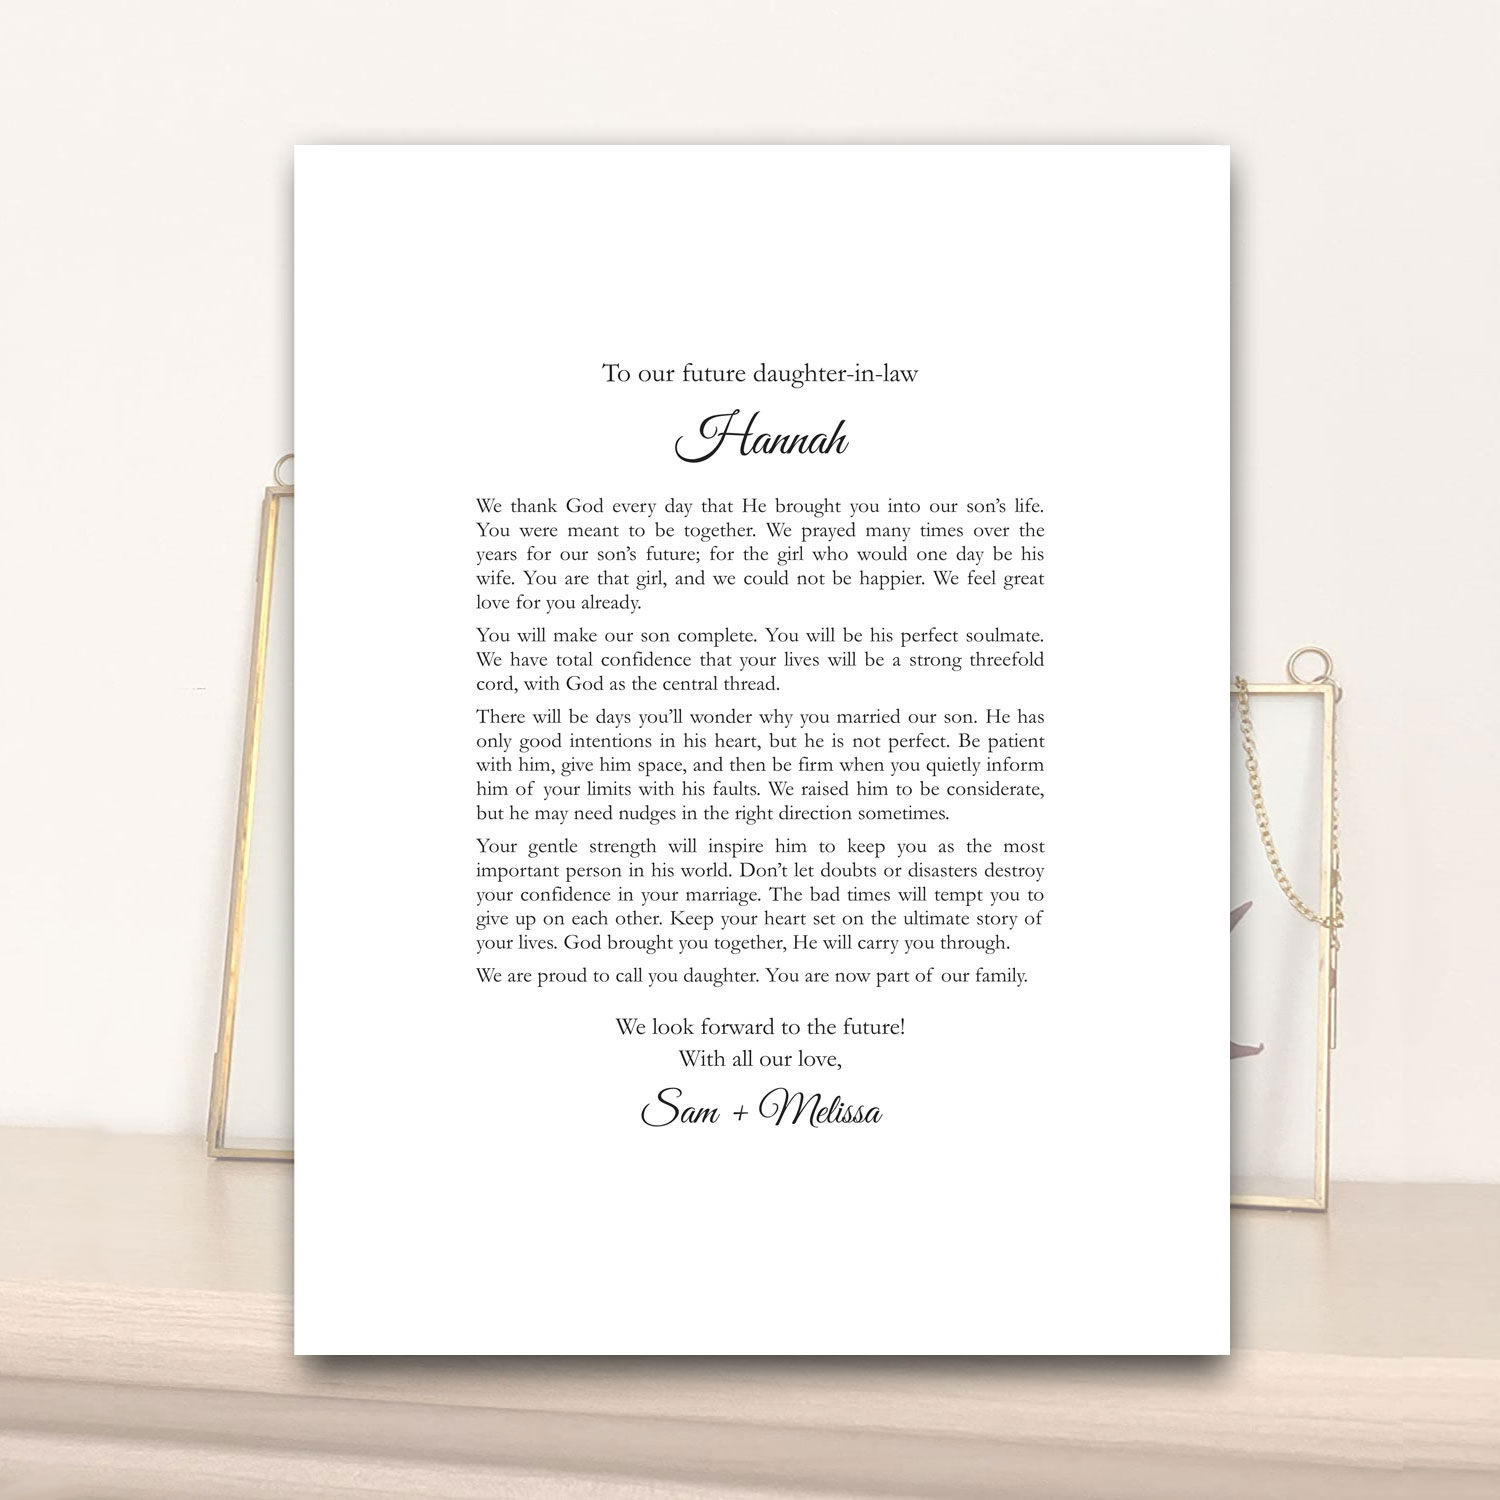 Personalized Letter to Your Future Daughter-in-Law - Kimenink